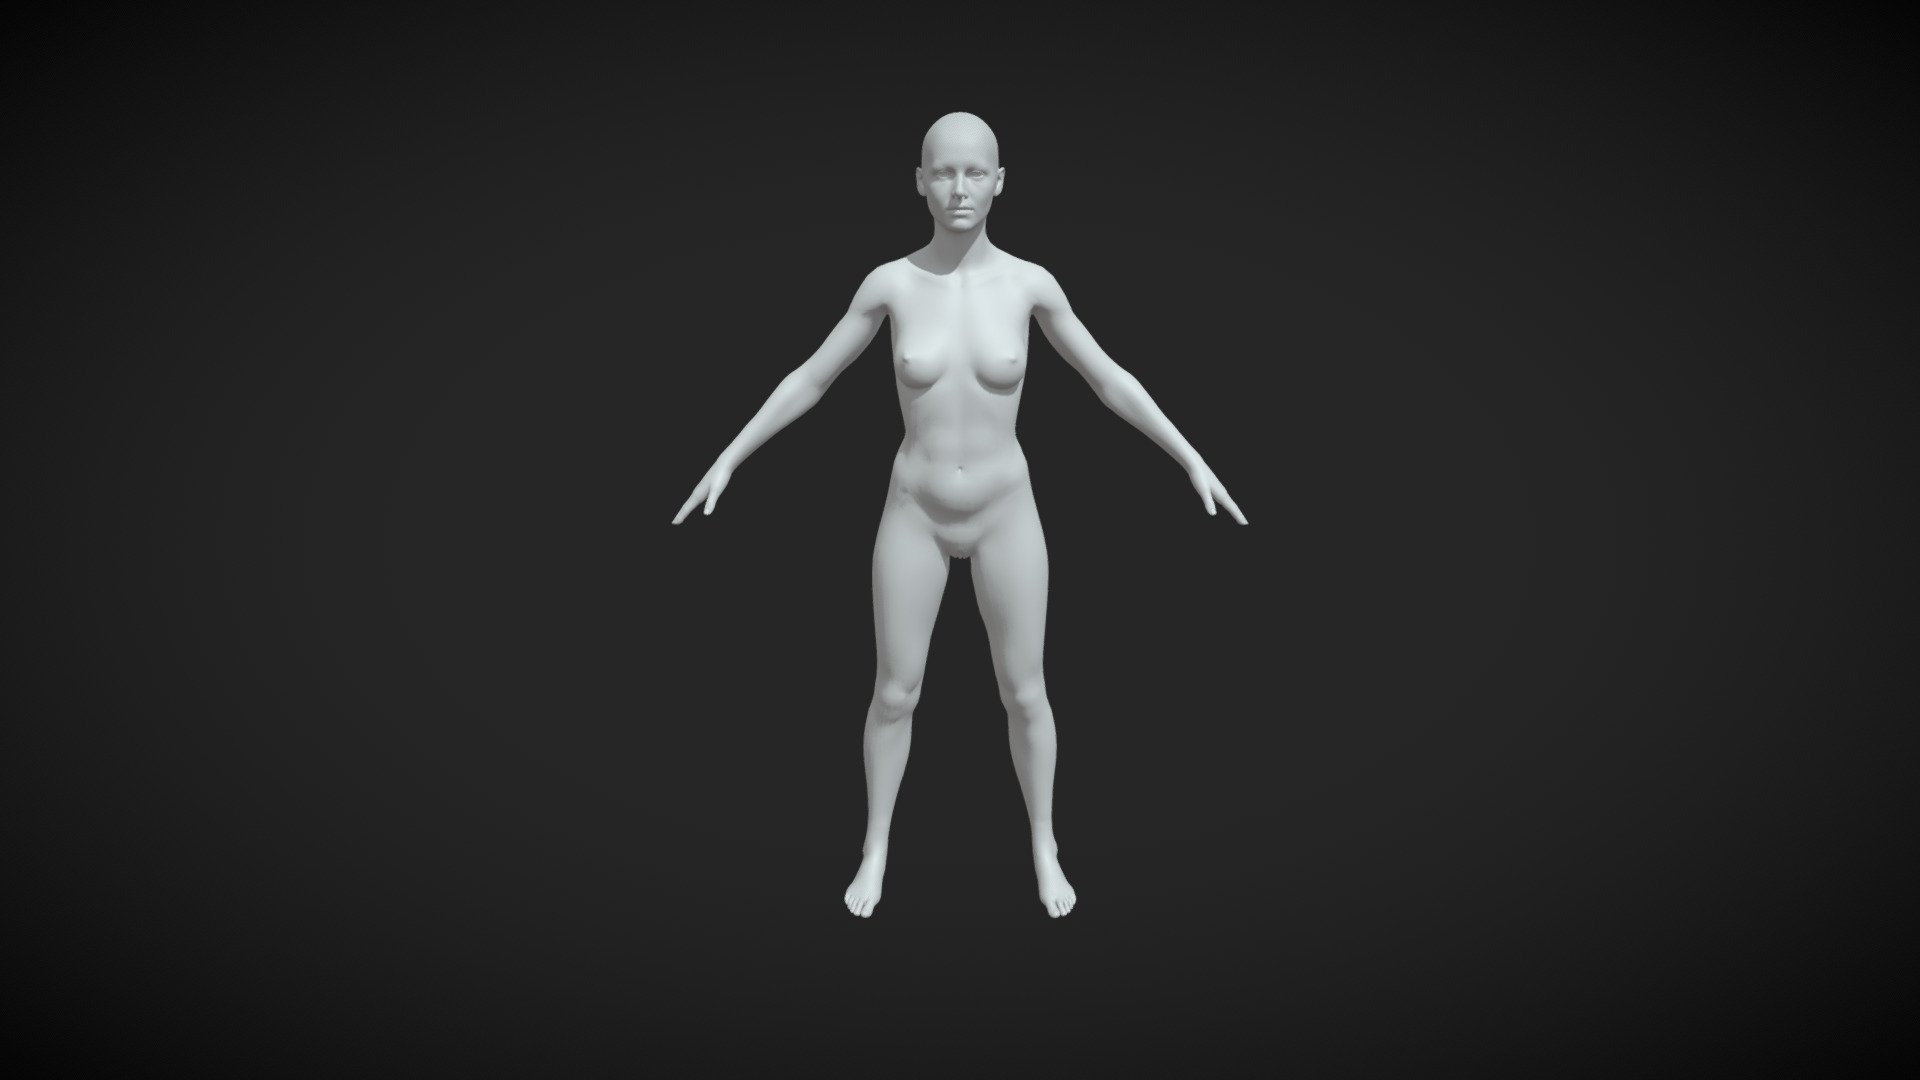 Introducing our Female Body Base Mesh 3D model – your essential starting point for digital character creation! 👩💻 Crafted with precision and anatomical accuracy, this versatile mesh provides a solid foundation for character modeling, animation, and sculpting projects. Whether you're a professional 3D artist, an animator, or a game developer, our Female Body Base Mesh offers the flexibility and realism you need to bring your characters to life. Download now and begin sculpting your next masterpiece! #FemaleBody #BaseMesh #3DModeling #CharacterDesign #DigitalArt - Female Body Base Mesh A-Pose - Buy Royalty Free 3D model by Sujit Mishra (@sujitanshumishra) 3d model